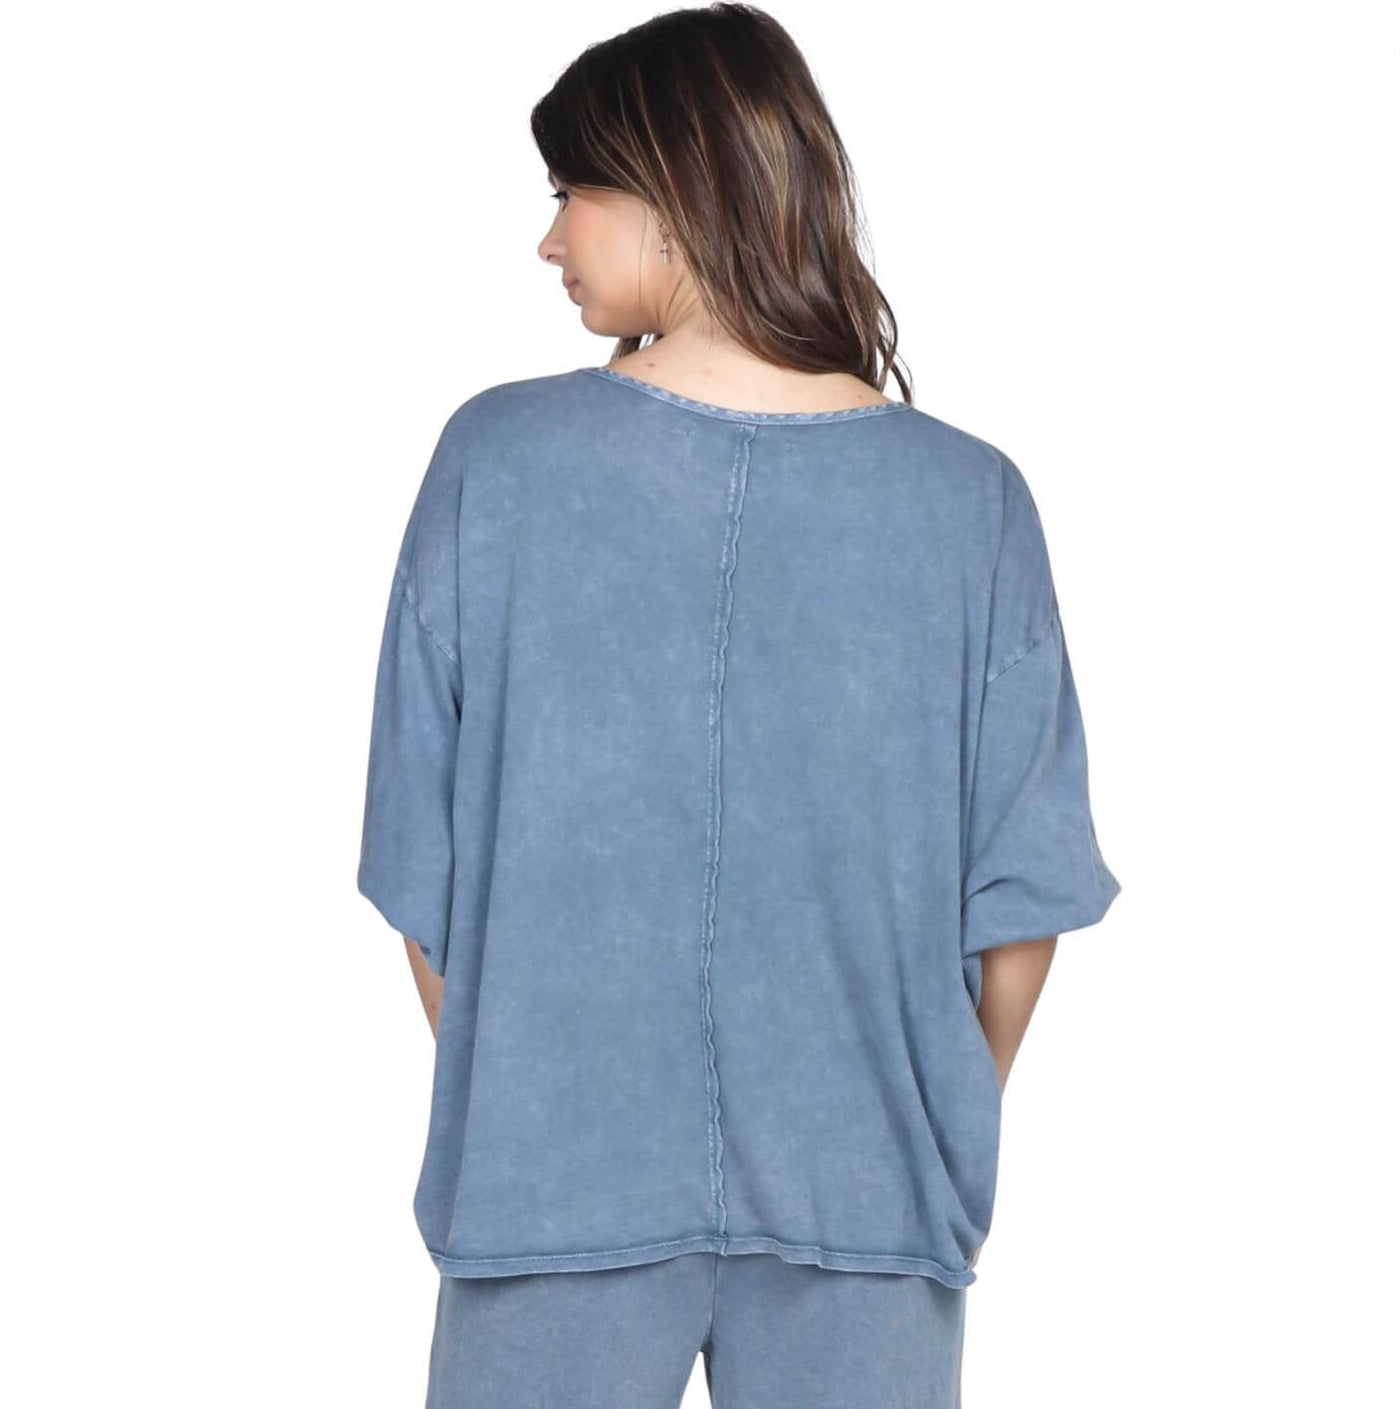 M. Rena Mineral Washed Oversized Linen Top with Pleating in Front | Style# S5000A | Made in USA | Natural Linen & Cotton Fabric | Ladies Made In America Clothing | Color: Denim Blue